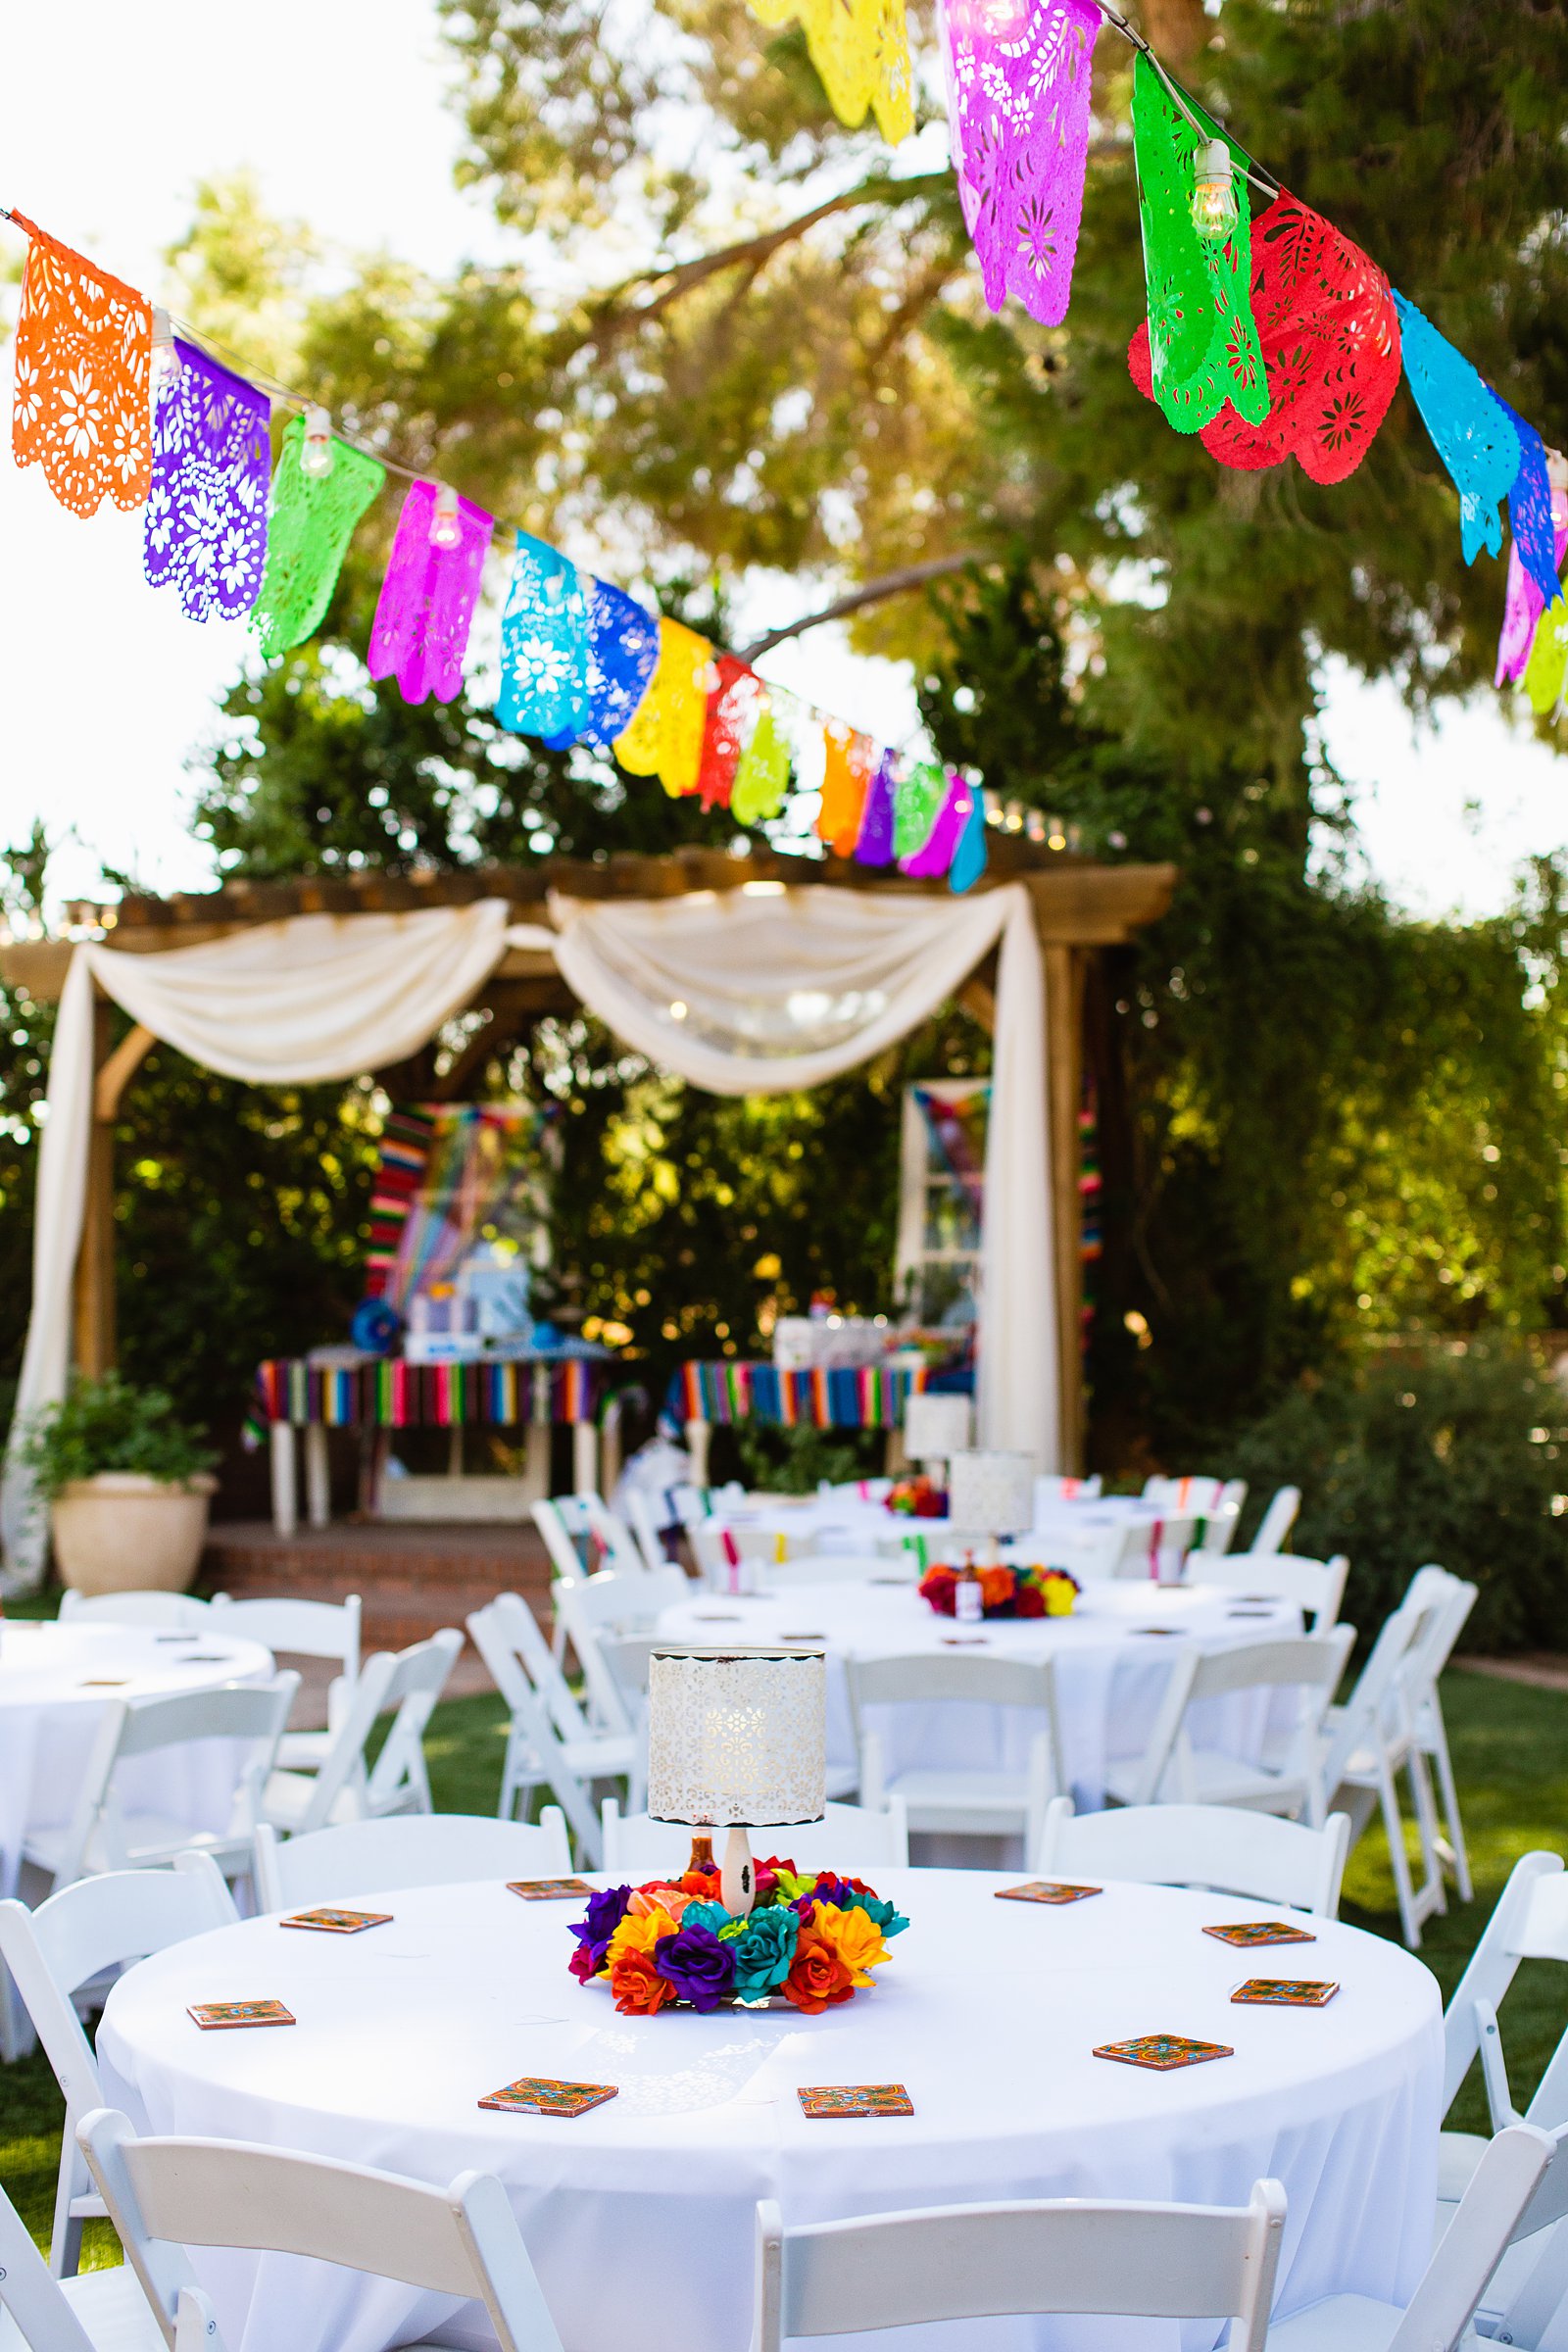 Colorful fiesta reception decorations at The Farmhouse at Schnepf Farms wedding reception by Queen Creek wedding photographer PMA Photography.